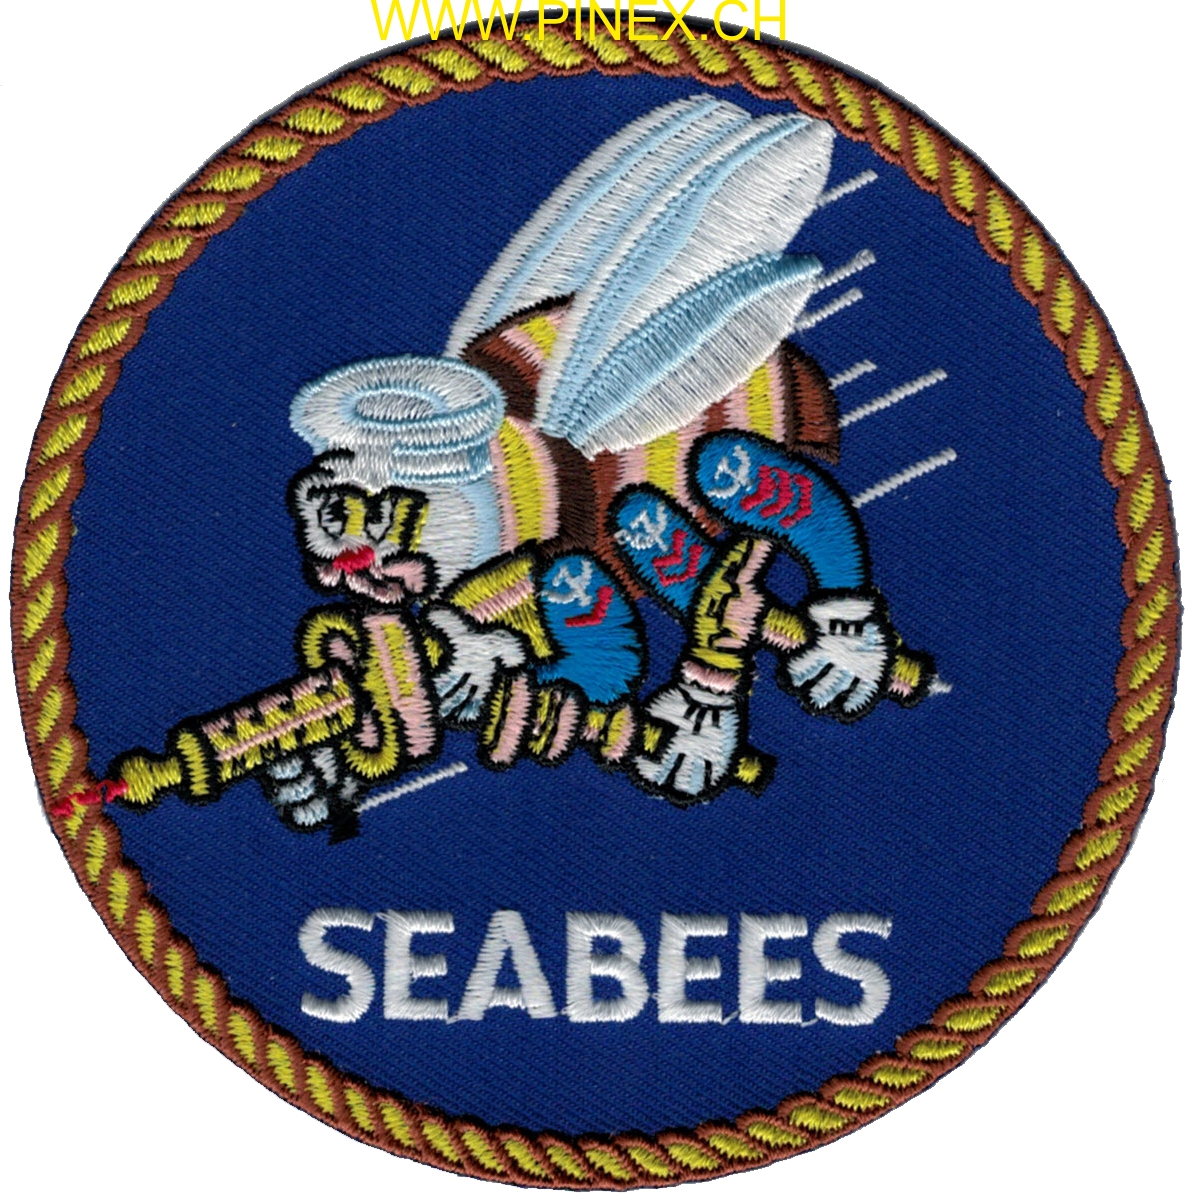 Construction Bn. SEABEES patch